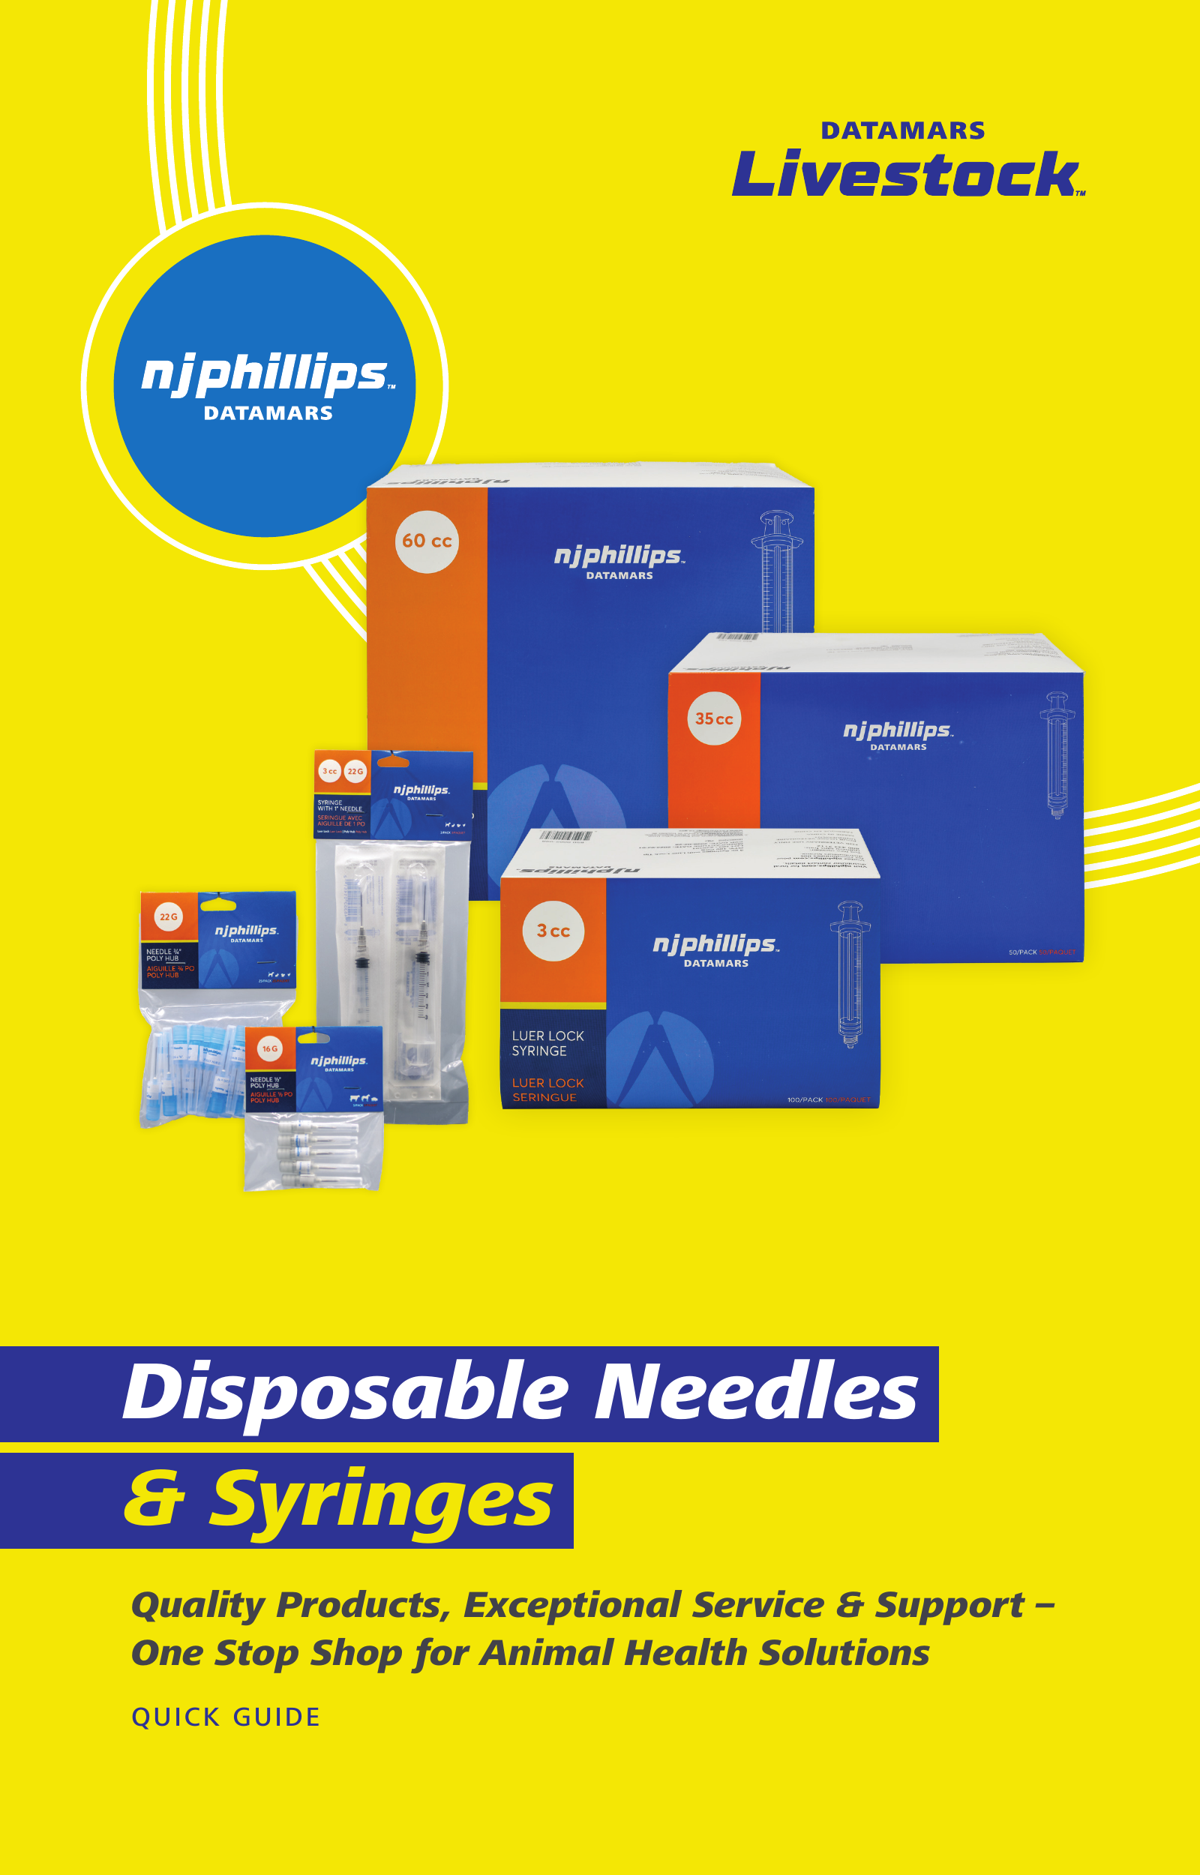 NJ-Phillips-Disposables-Needles--Syringes-Quick-Guide.png